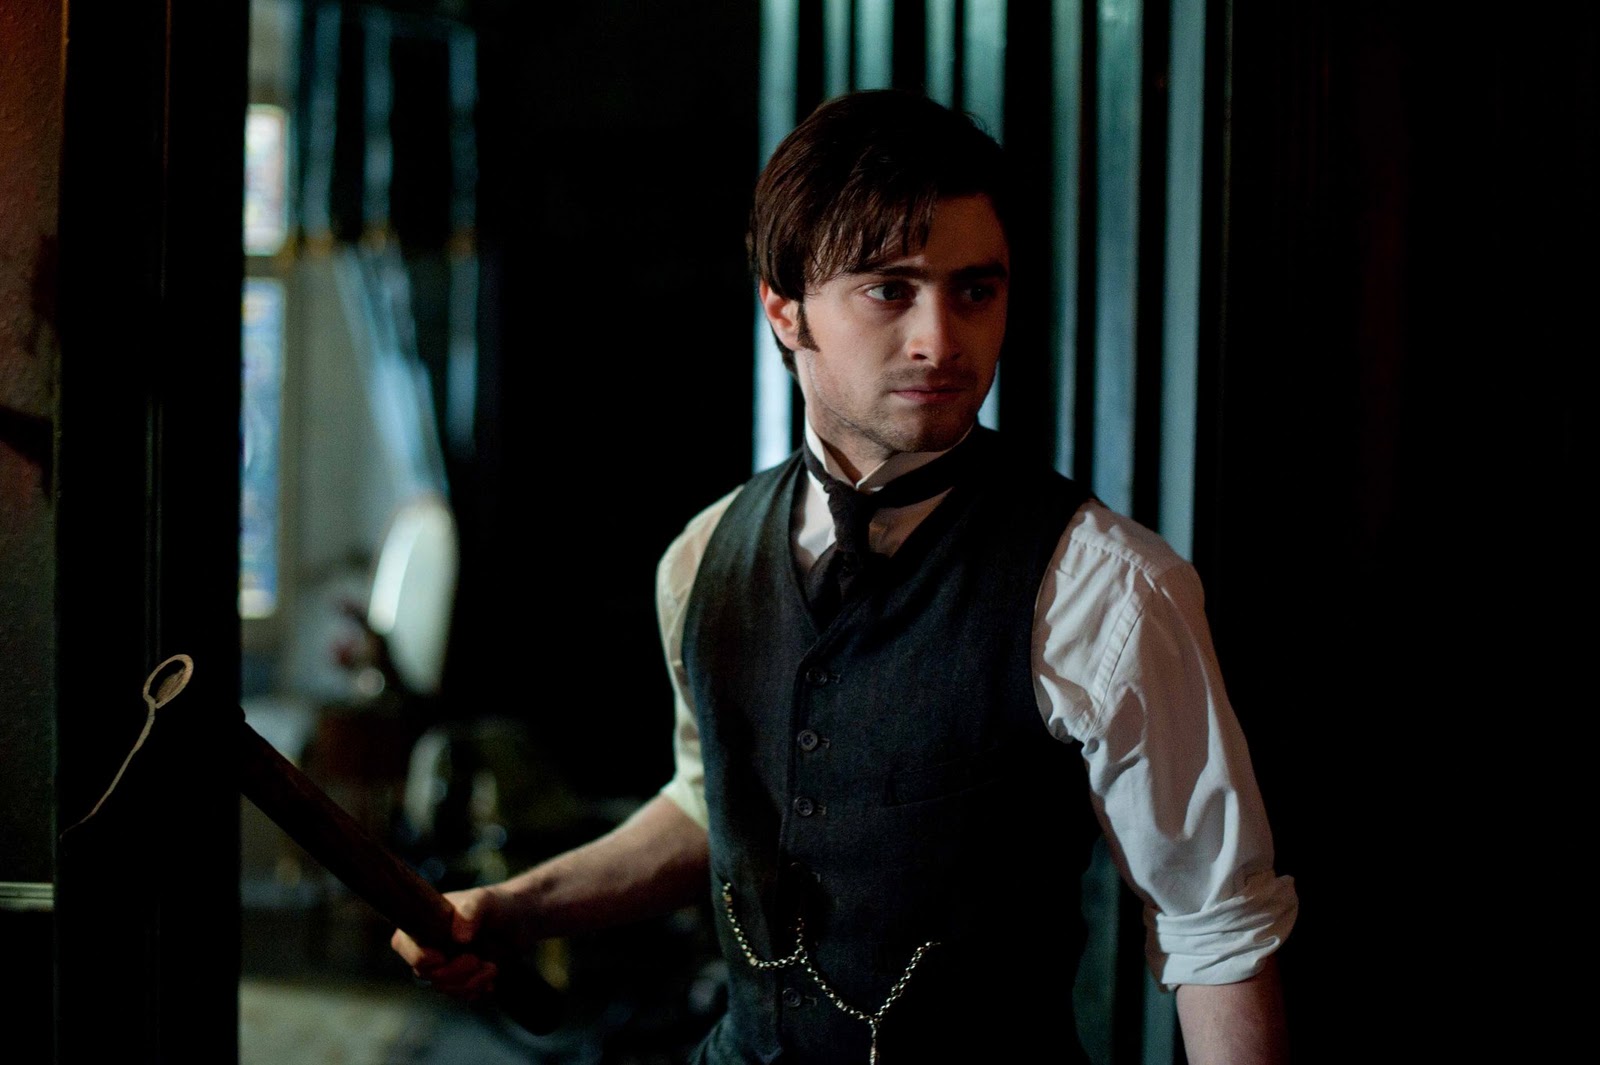 Daniel Radcliffe Spooked In New 'The Woman in Black' Trailer